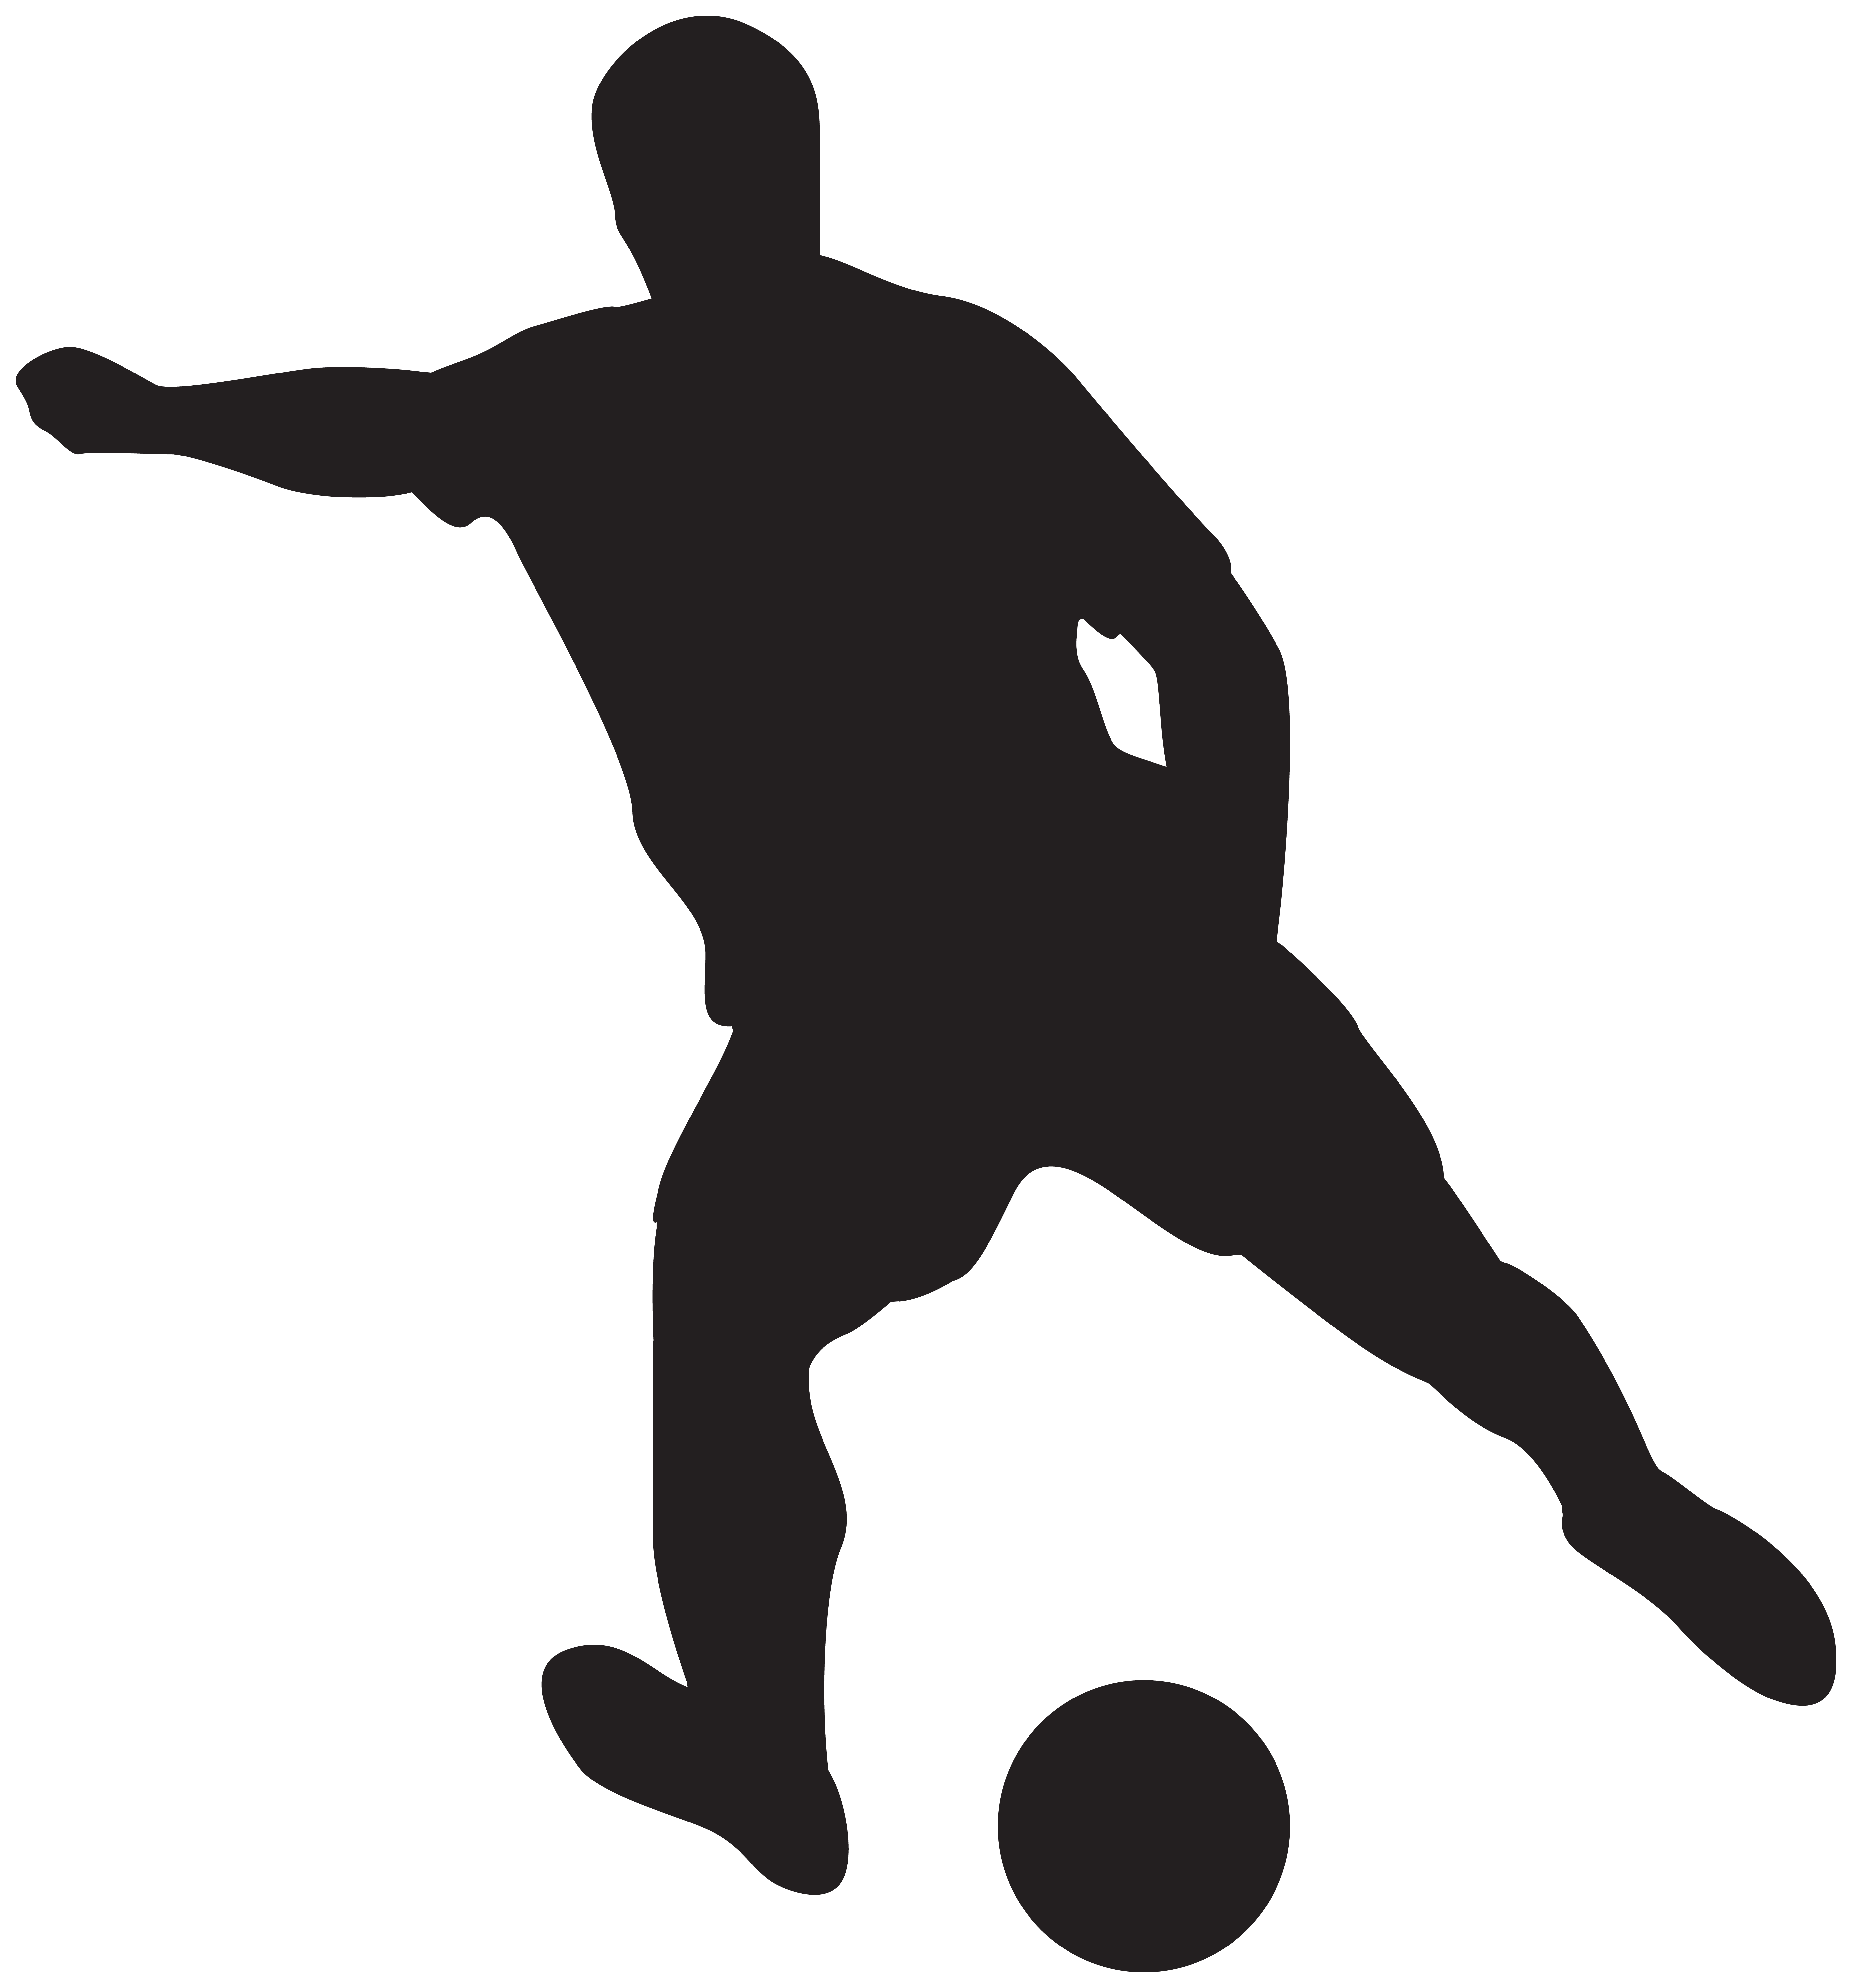 Soccer player silhouettes.